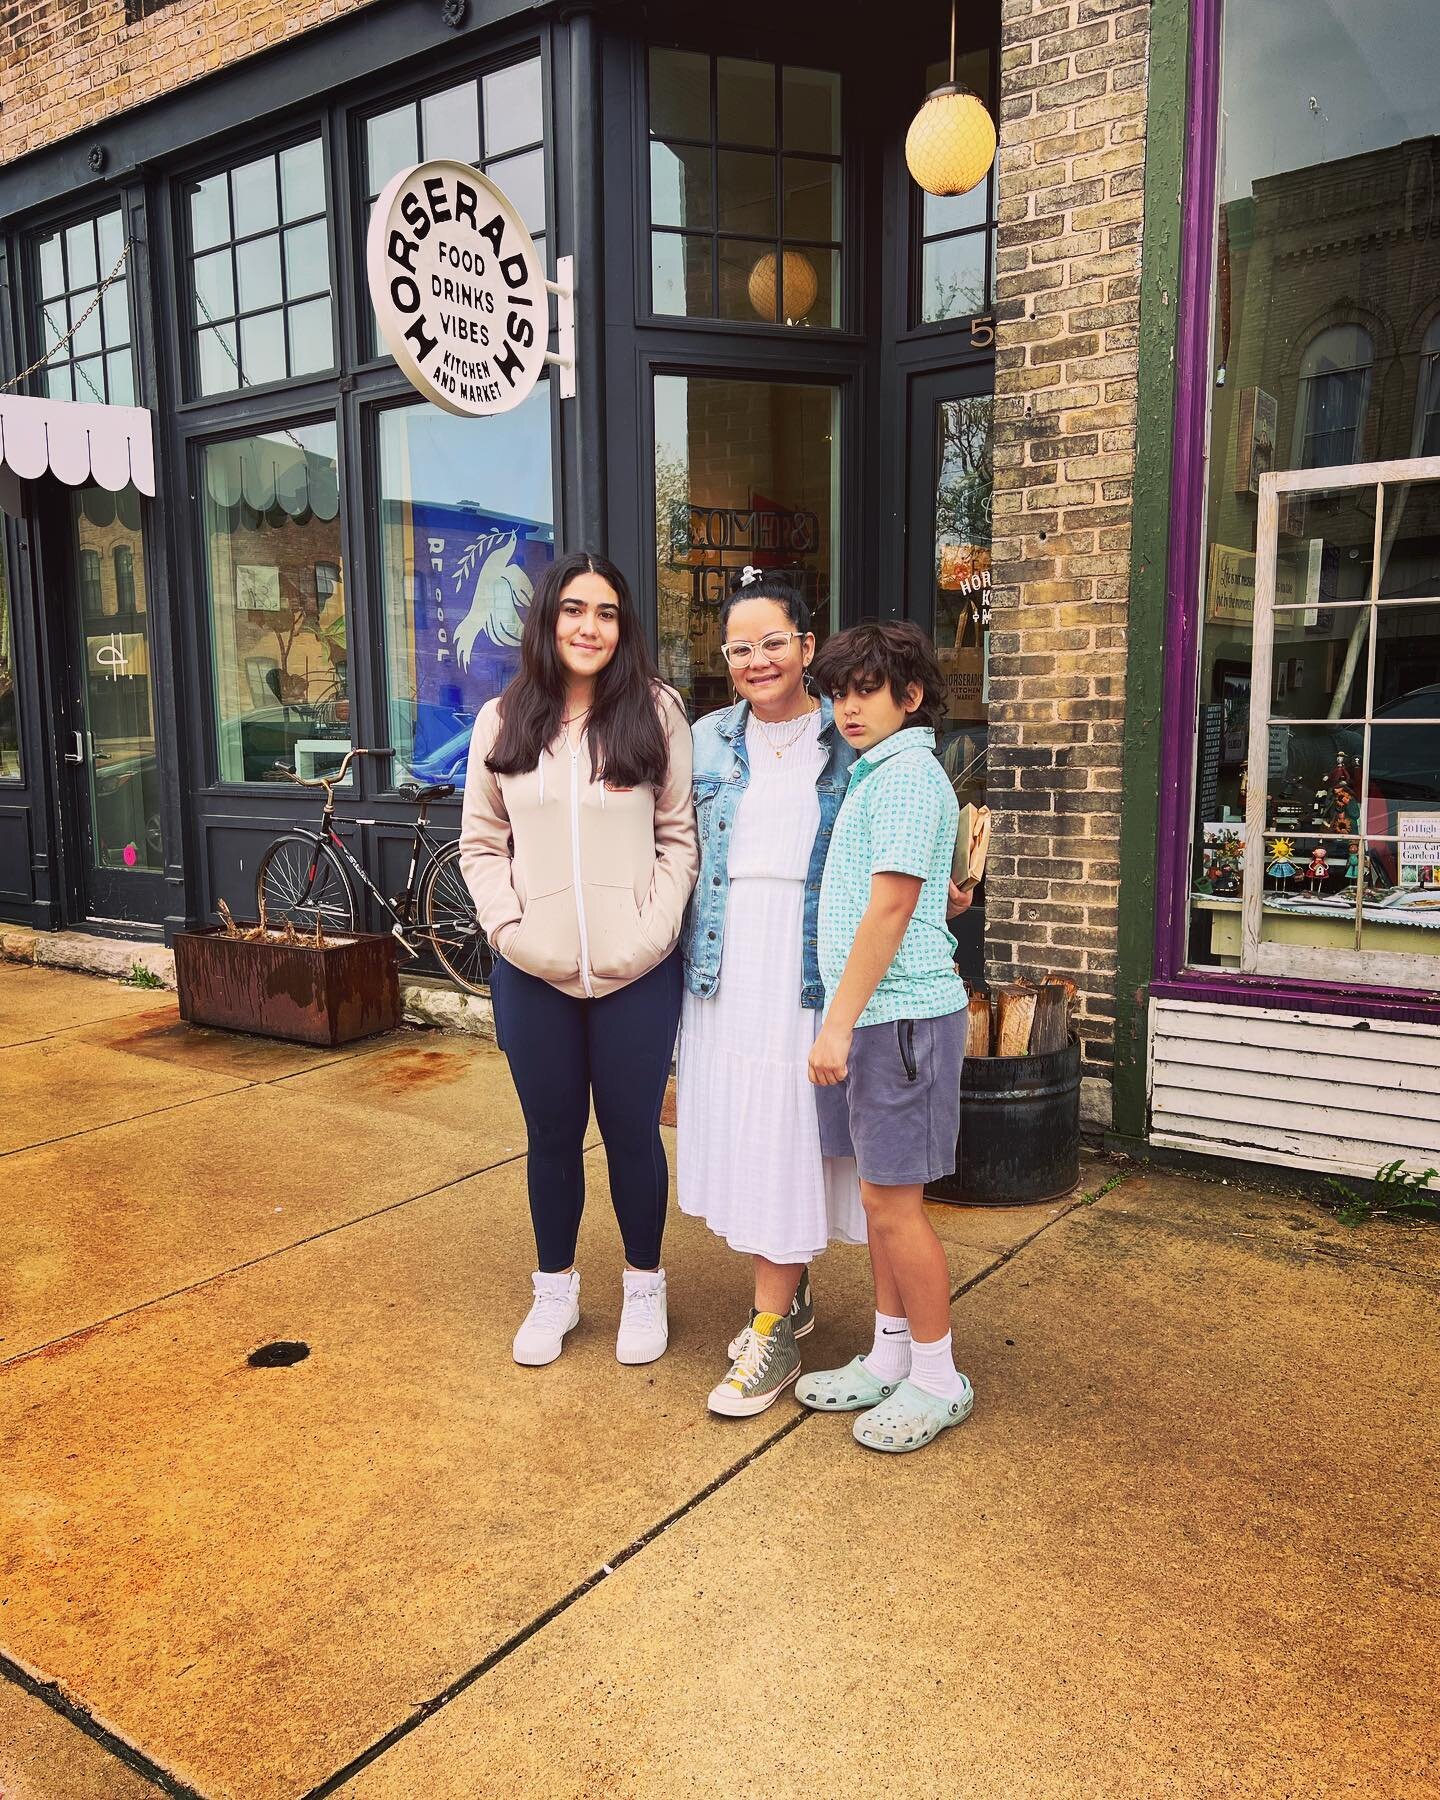 Friendly reminder we are closed today so we can spend time with our kids and moms. Wishing you all a beautiful Mother&rsquo;s Day. 

Spent our morning eating our way through Princeton this morning. Sweets from @renardbakeshop and brunch and drinks at